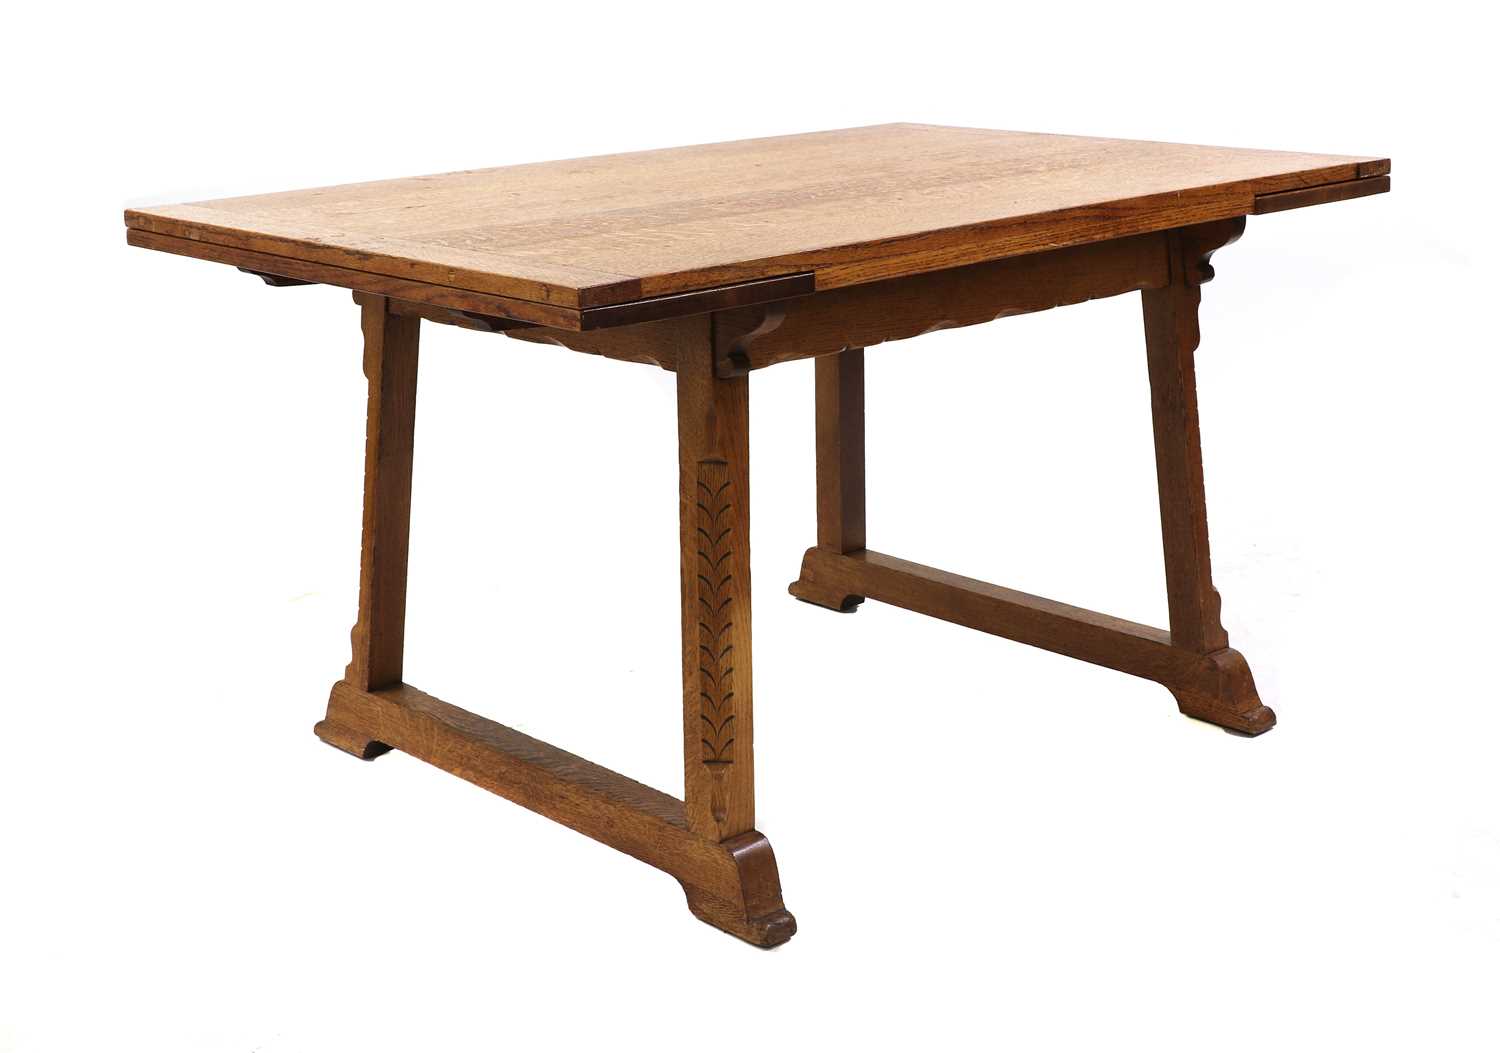 Lot 224 - An Arts and Crafts oak extending dining table